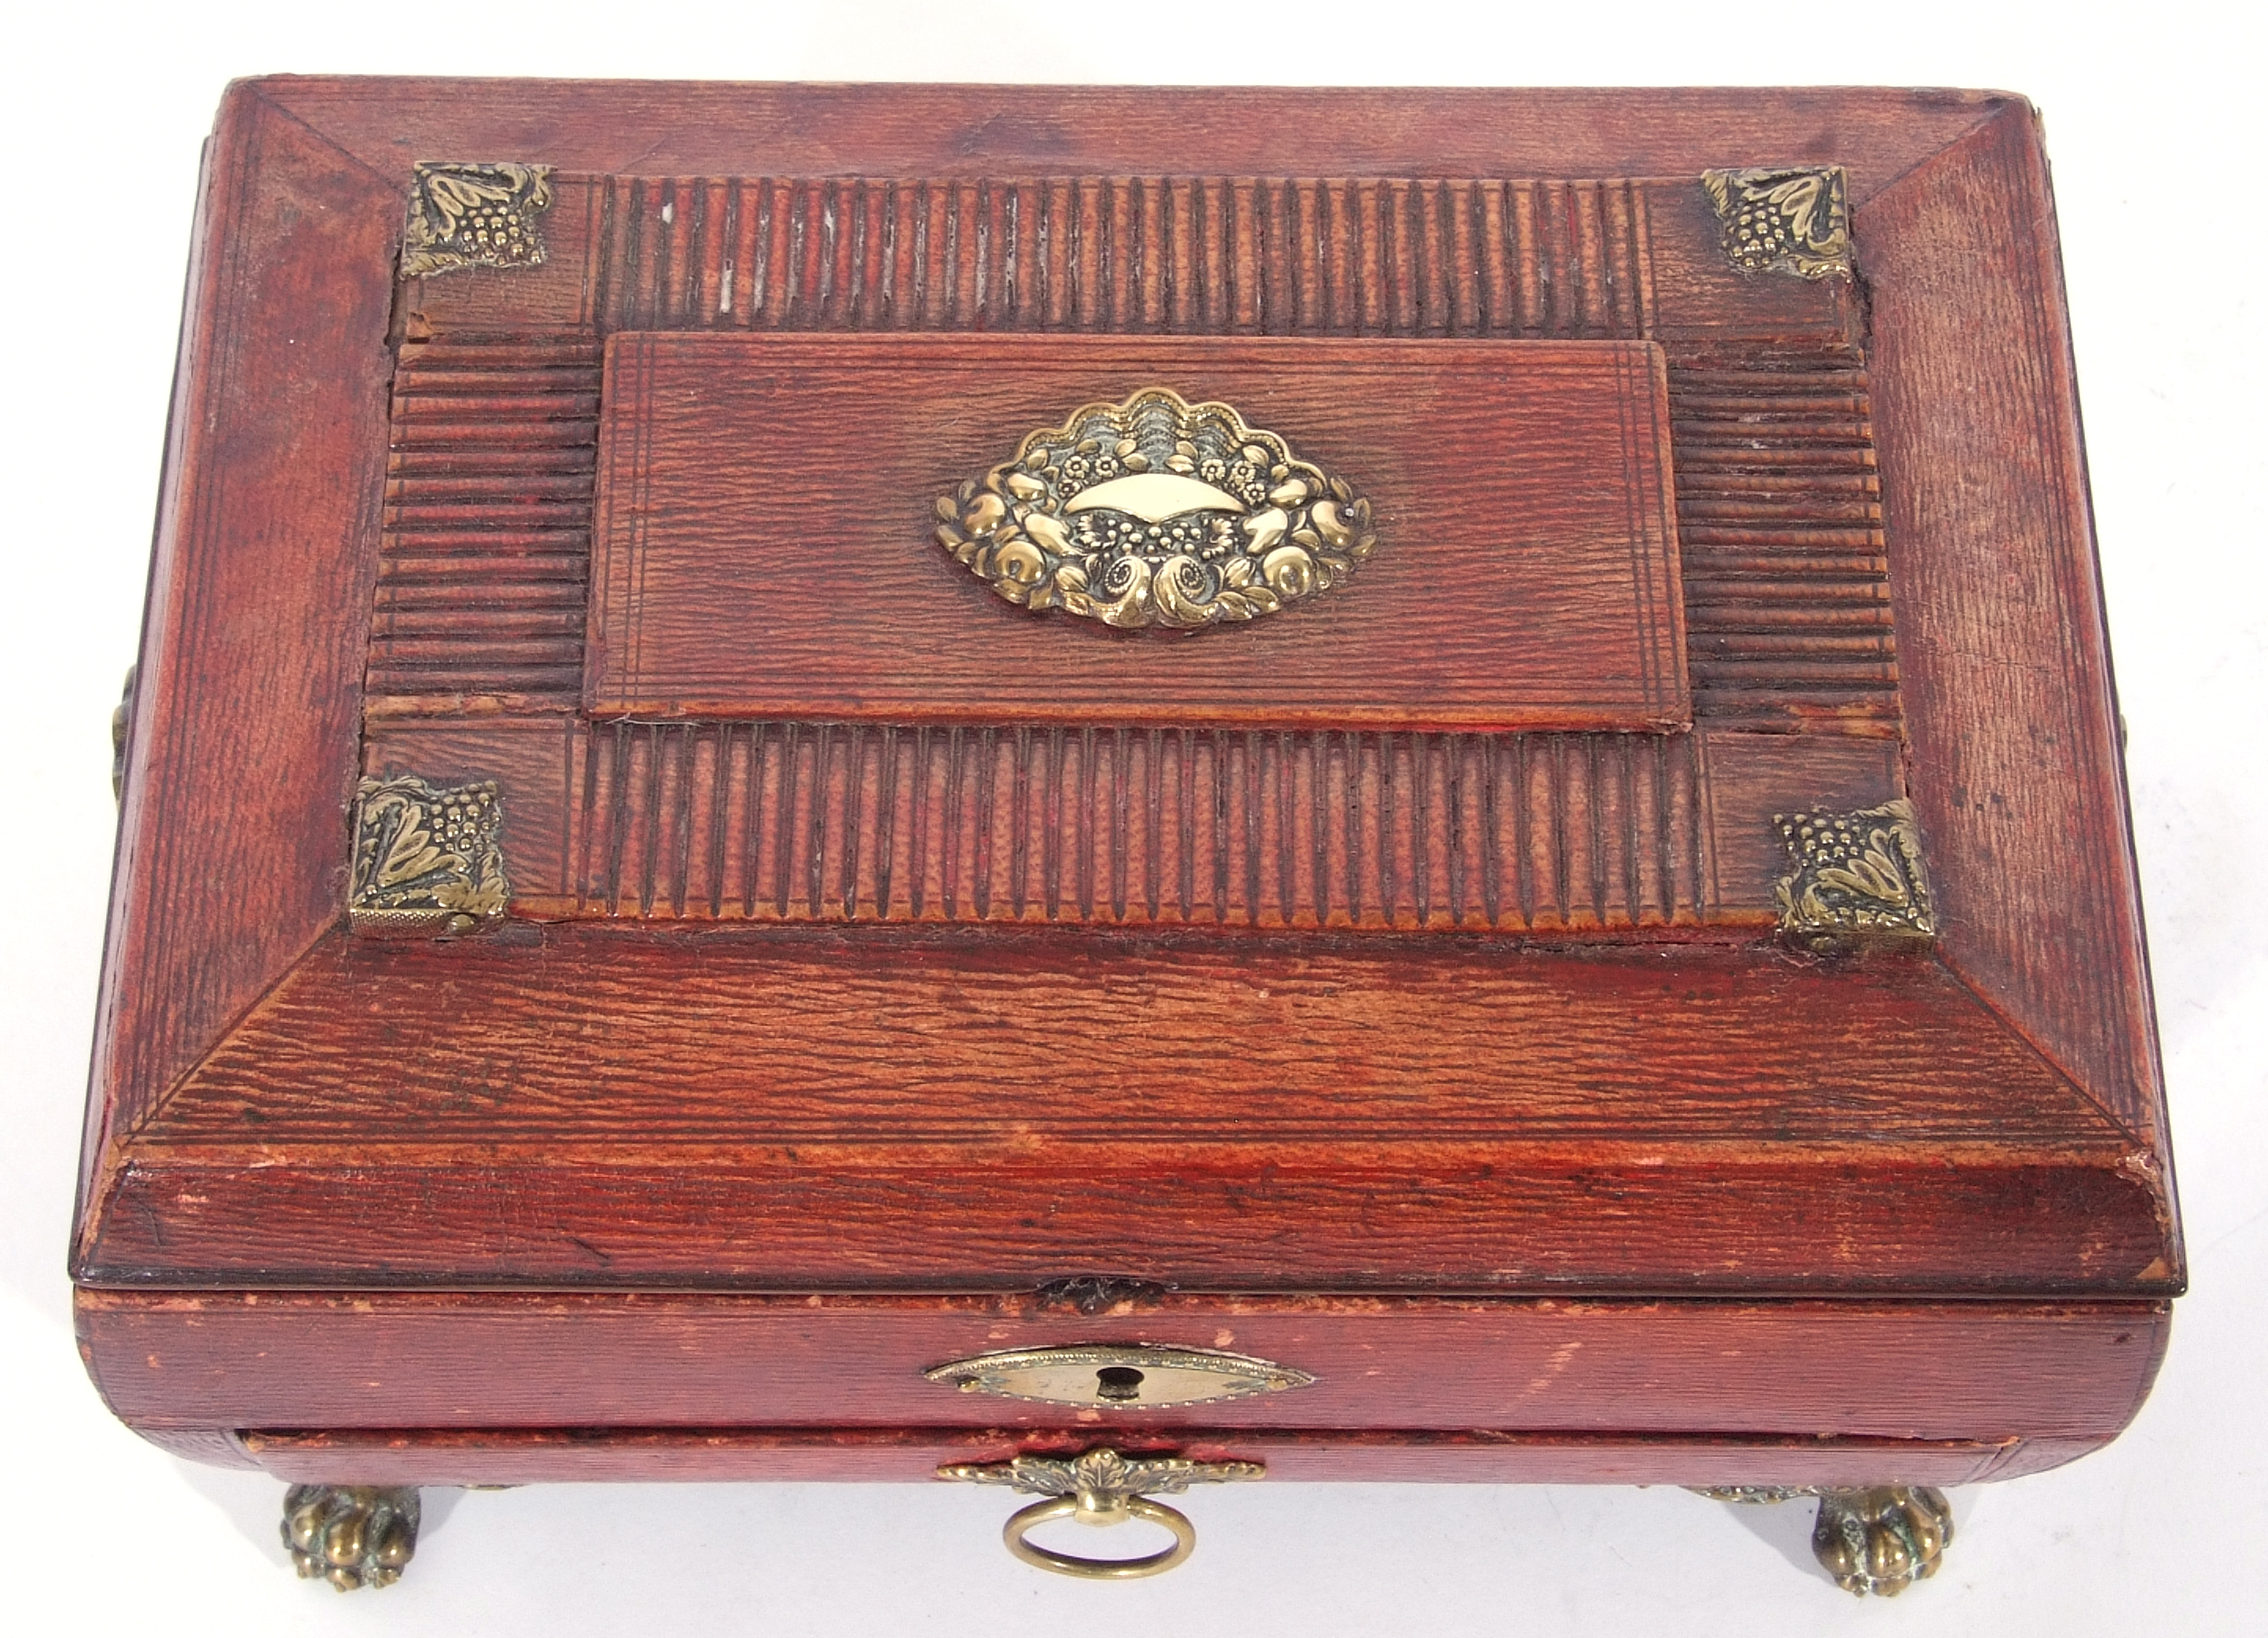 Regency red leather and brass embossed jewel box, hinged lid with silk lined interior, single drawer - Image 10 of 11